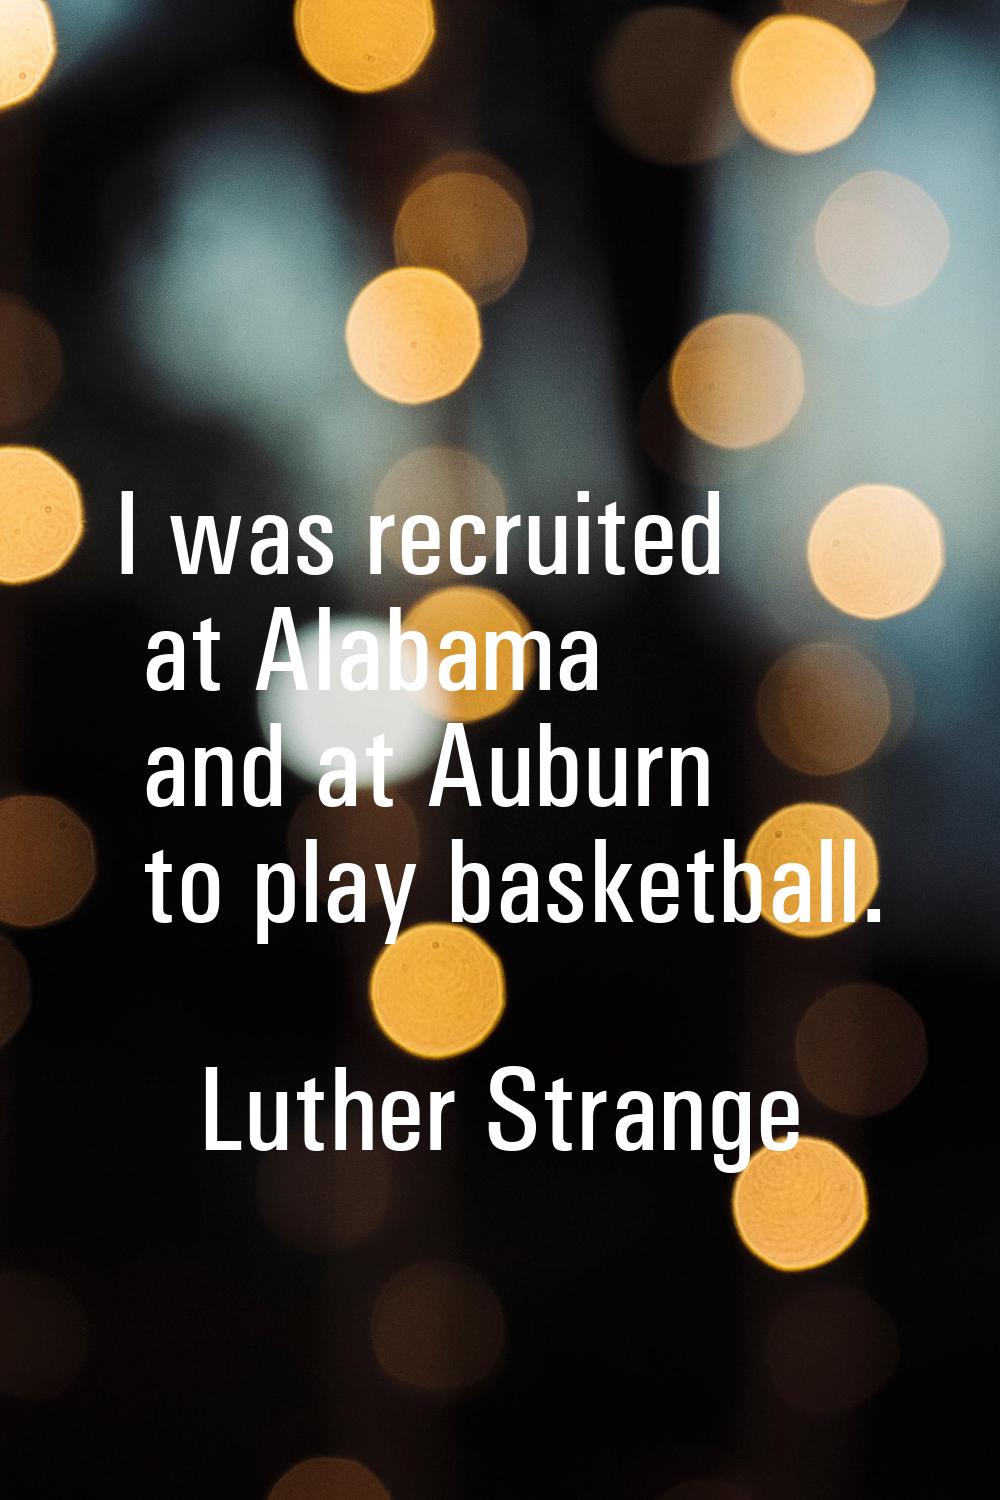 I was recruited at Alabama and at Auburn to play basketball.